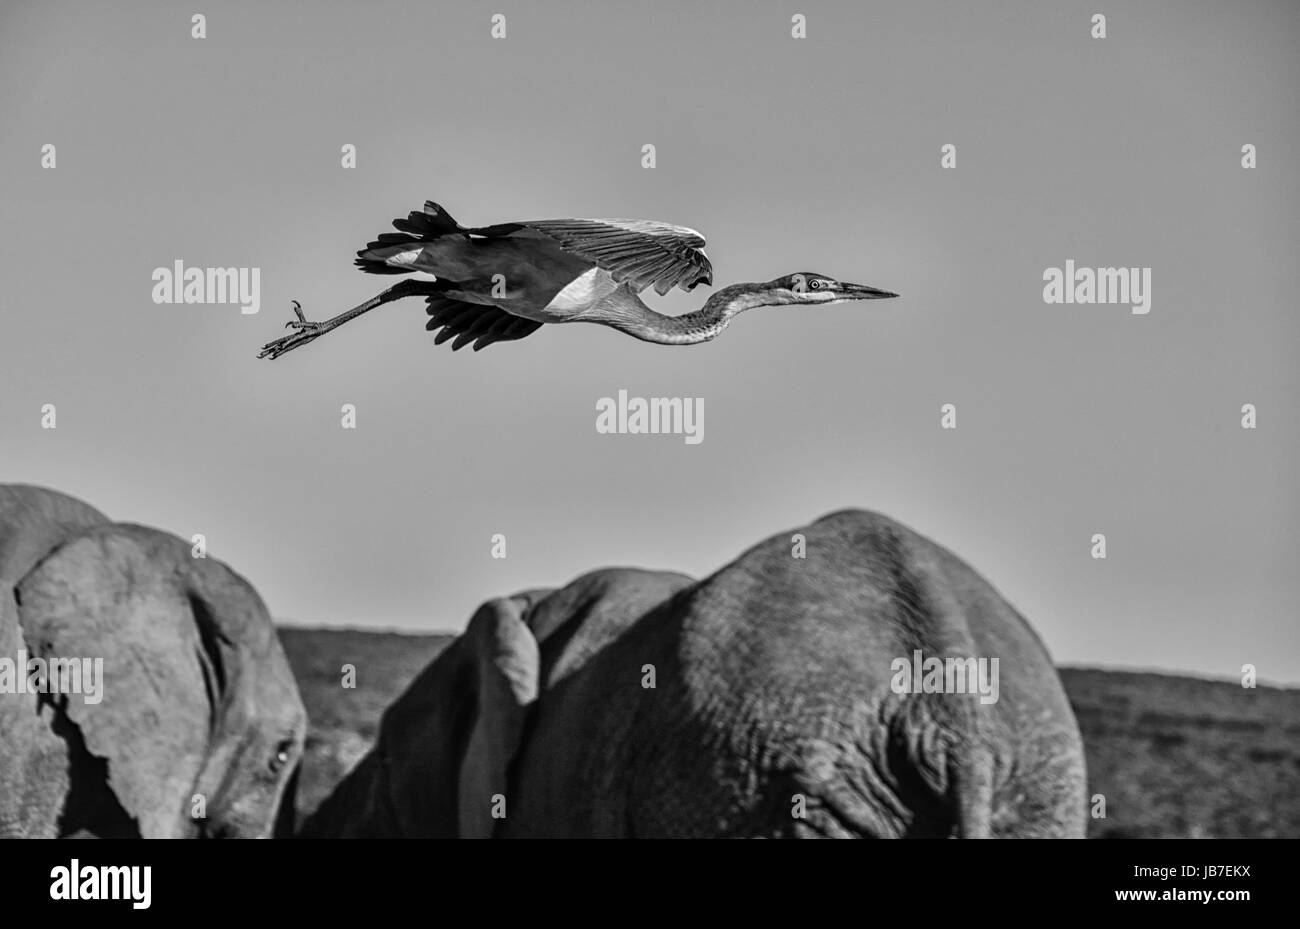 A Black-headed Heron in flight past Elephants in Southern Africa Stock Photo